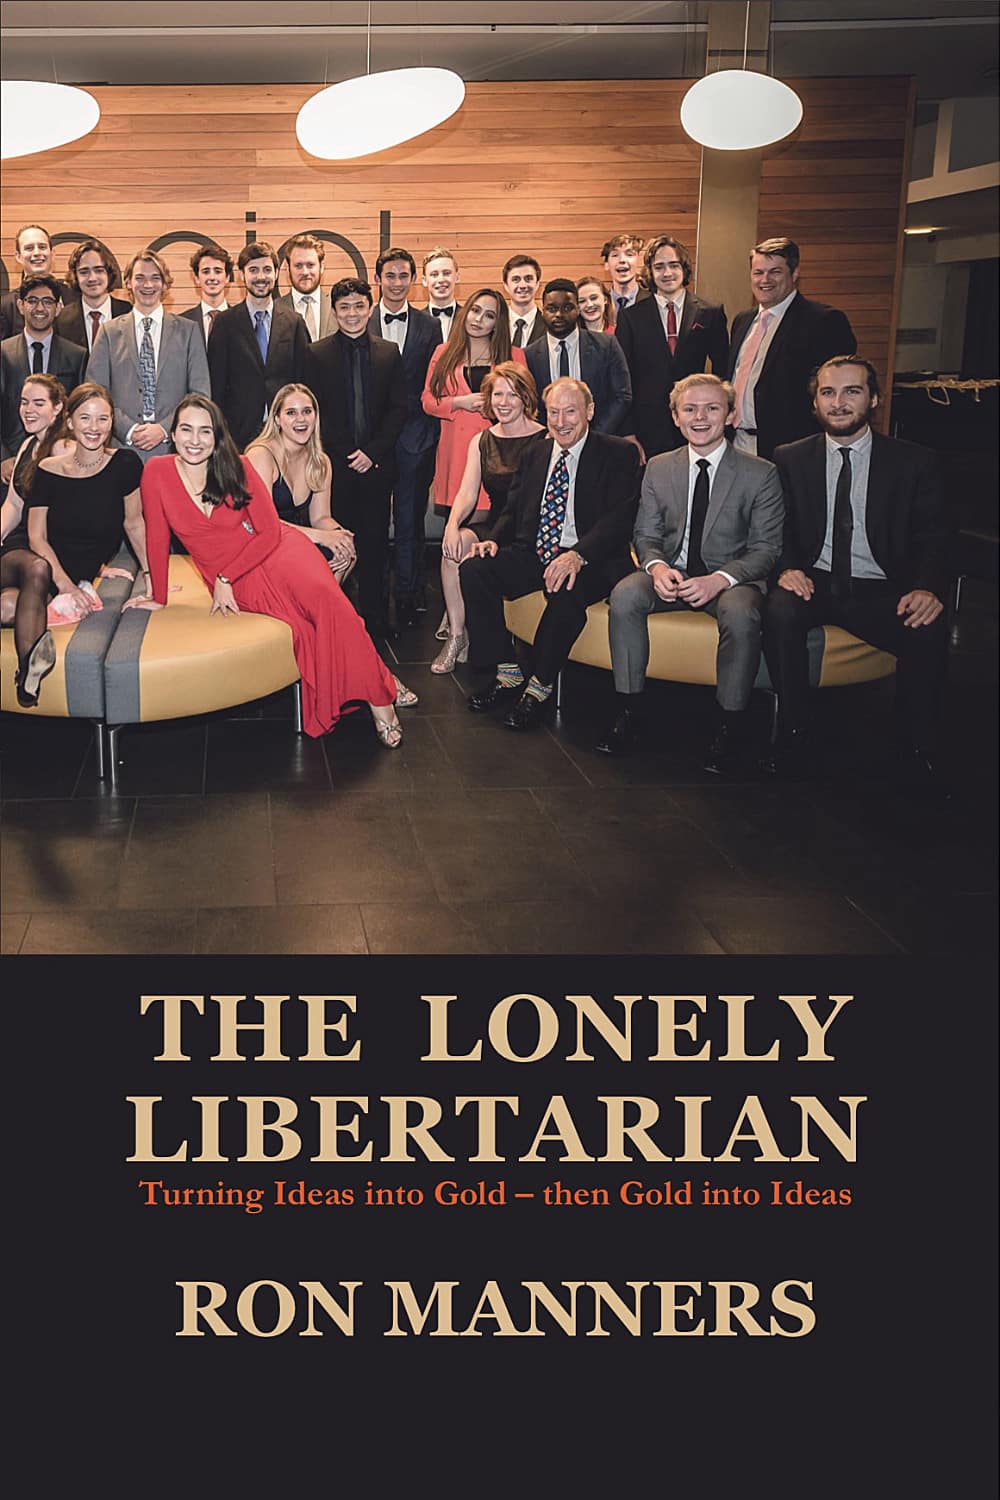 ‘The Lonely Libertarian’ book cover